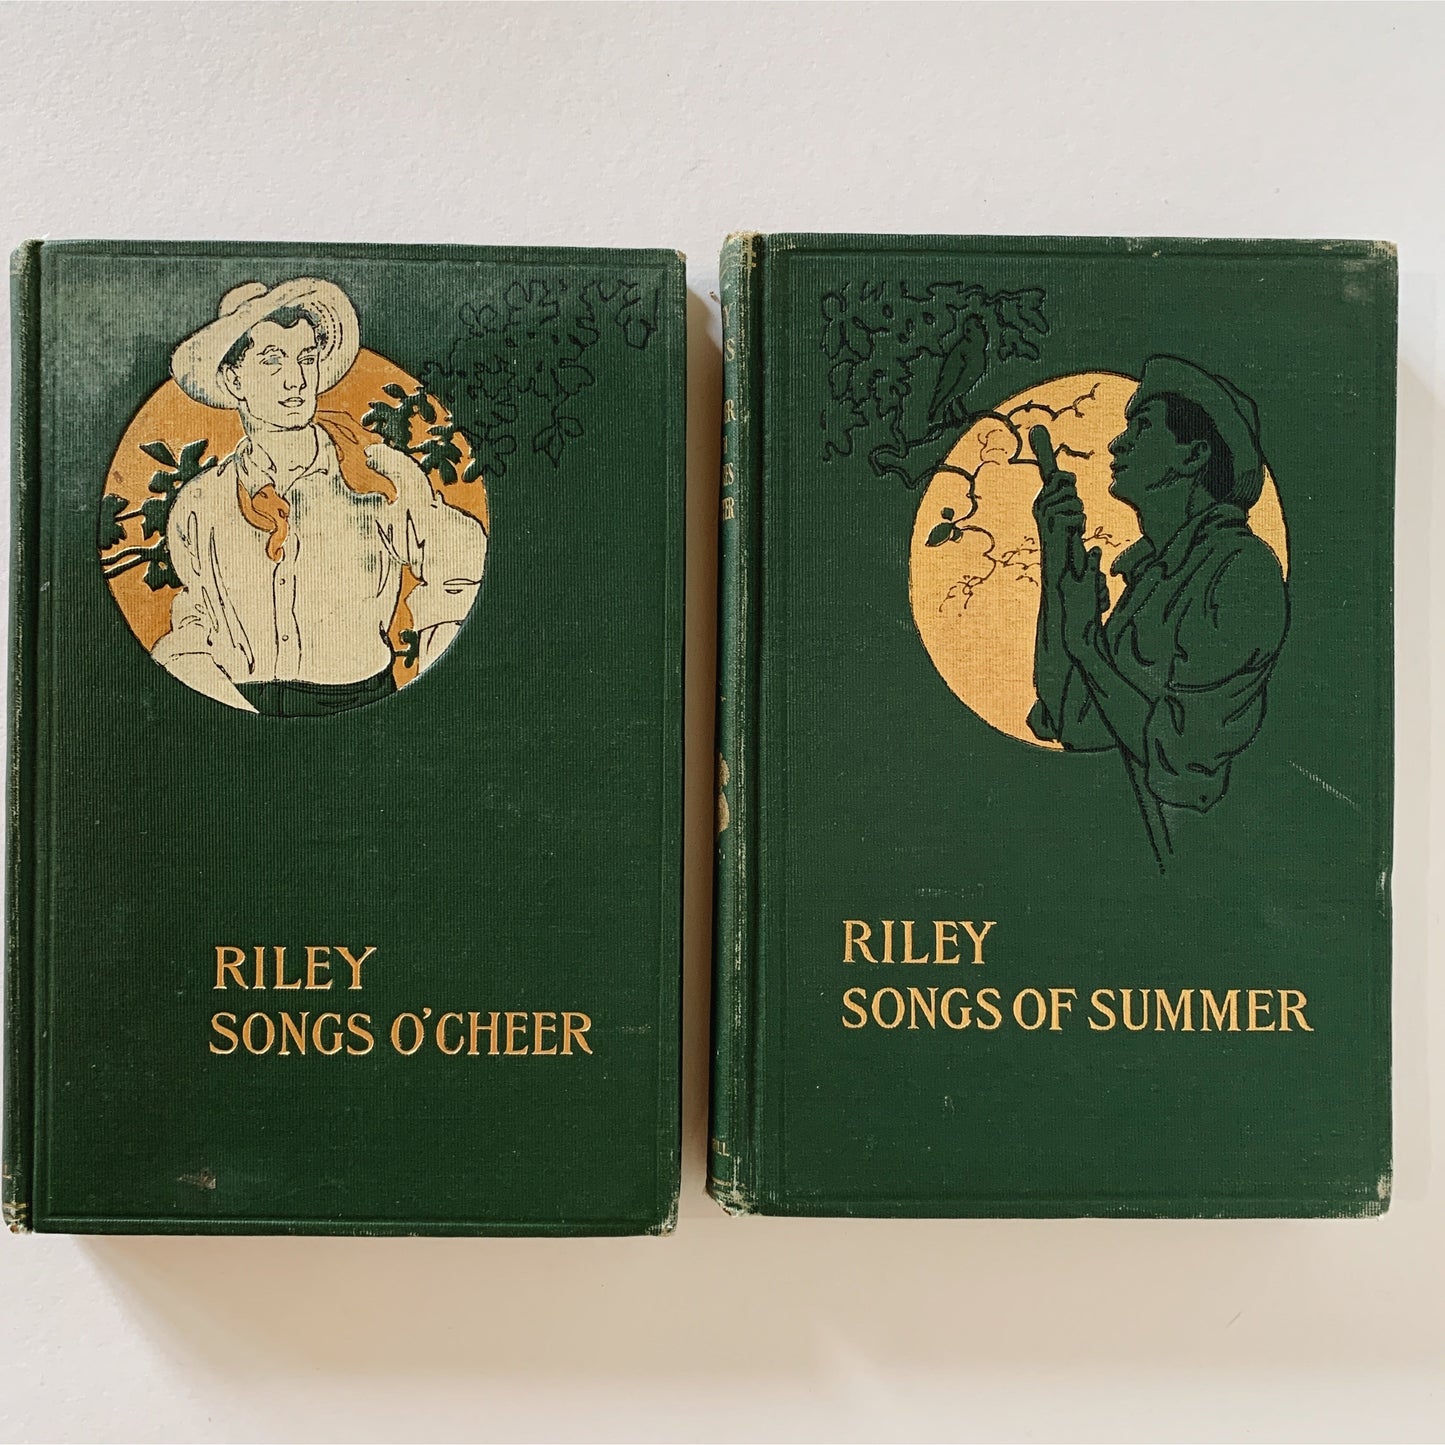 James Whitcomb Riley Green Vintage Poetry Books, Green Books for Shelf Styling